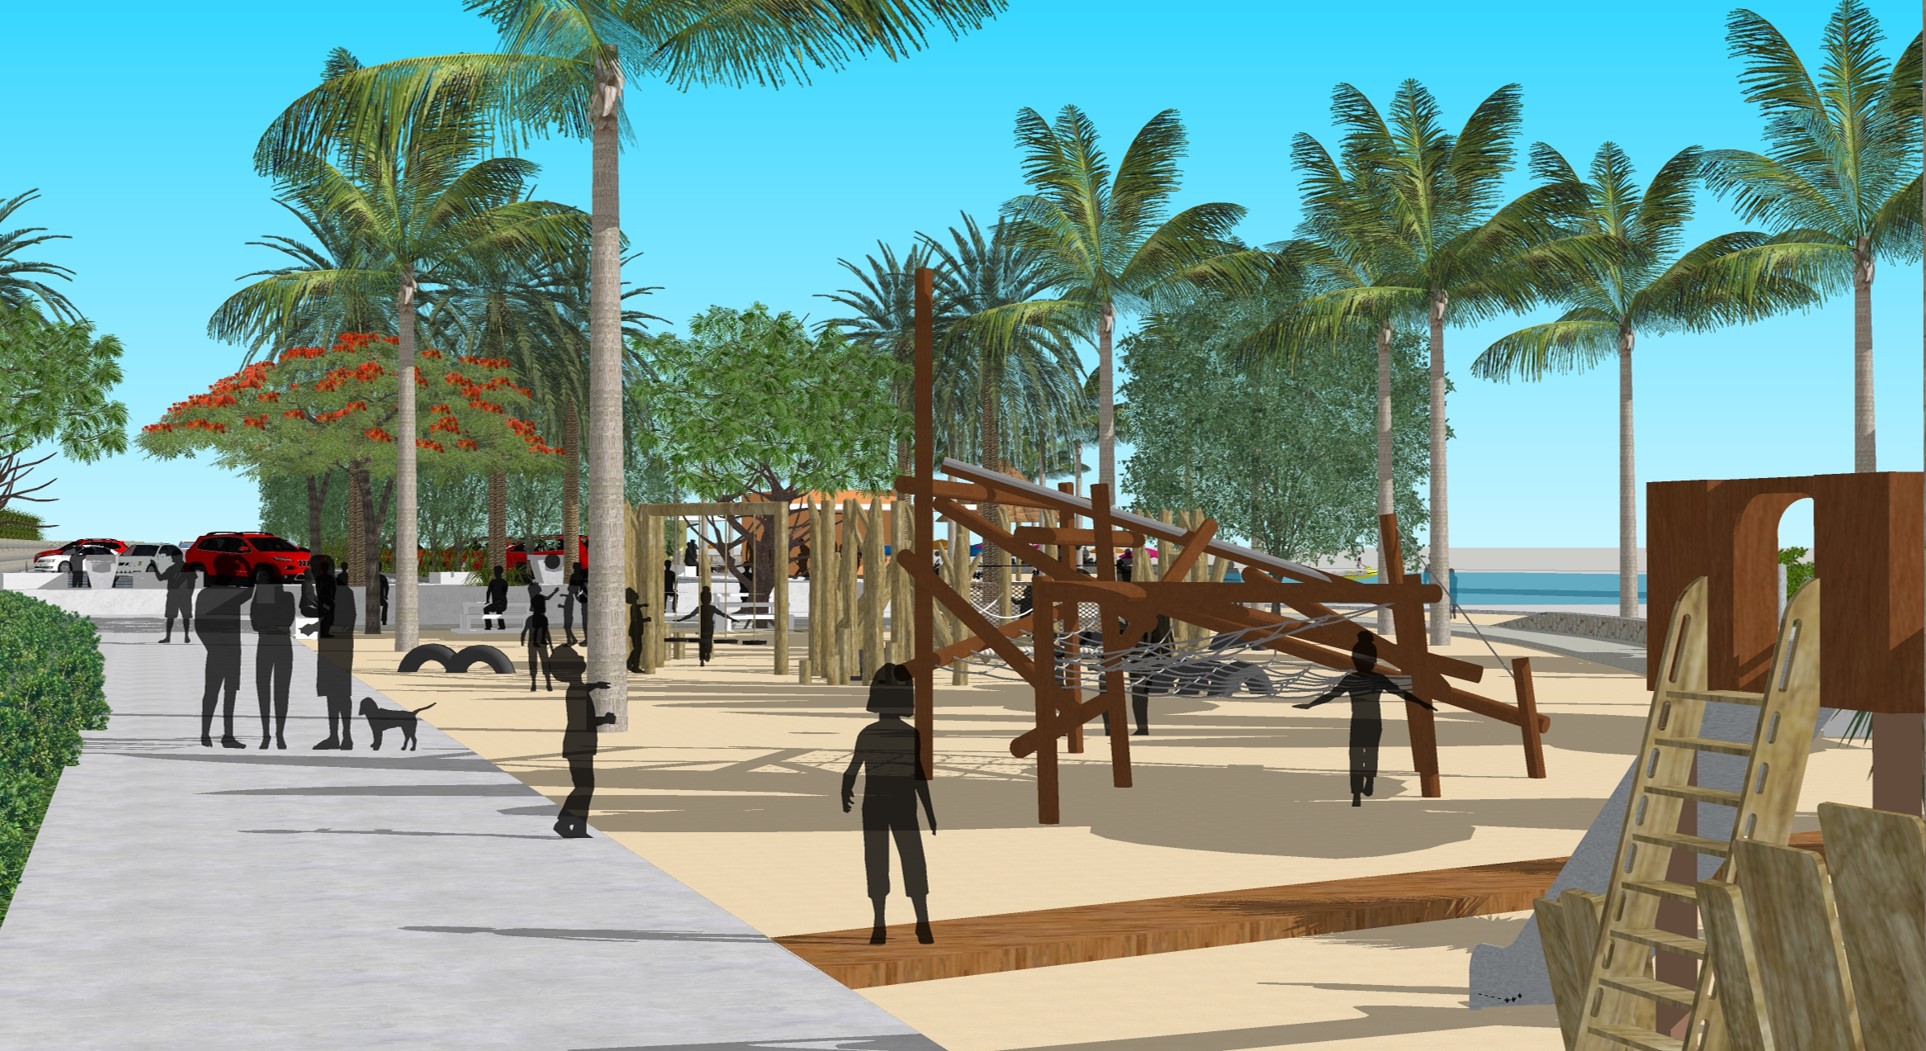 Construction of the Marie Pampoen Recreational Area enters phase 3